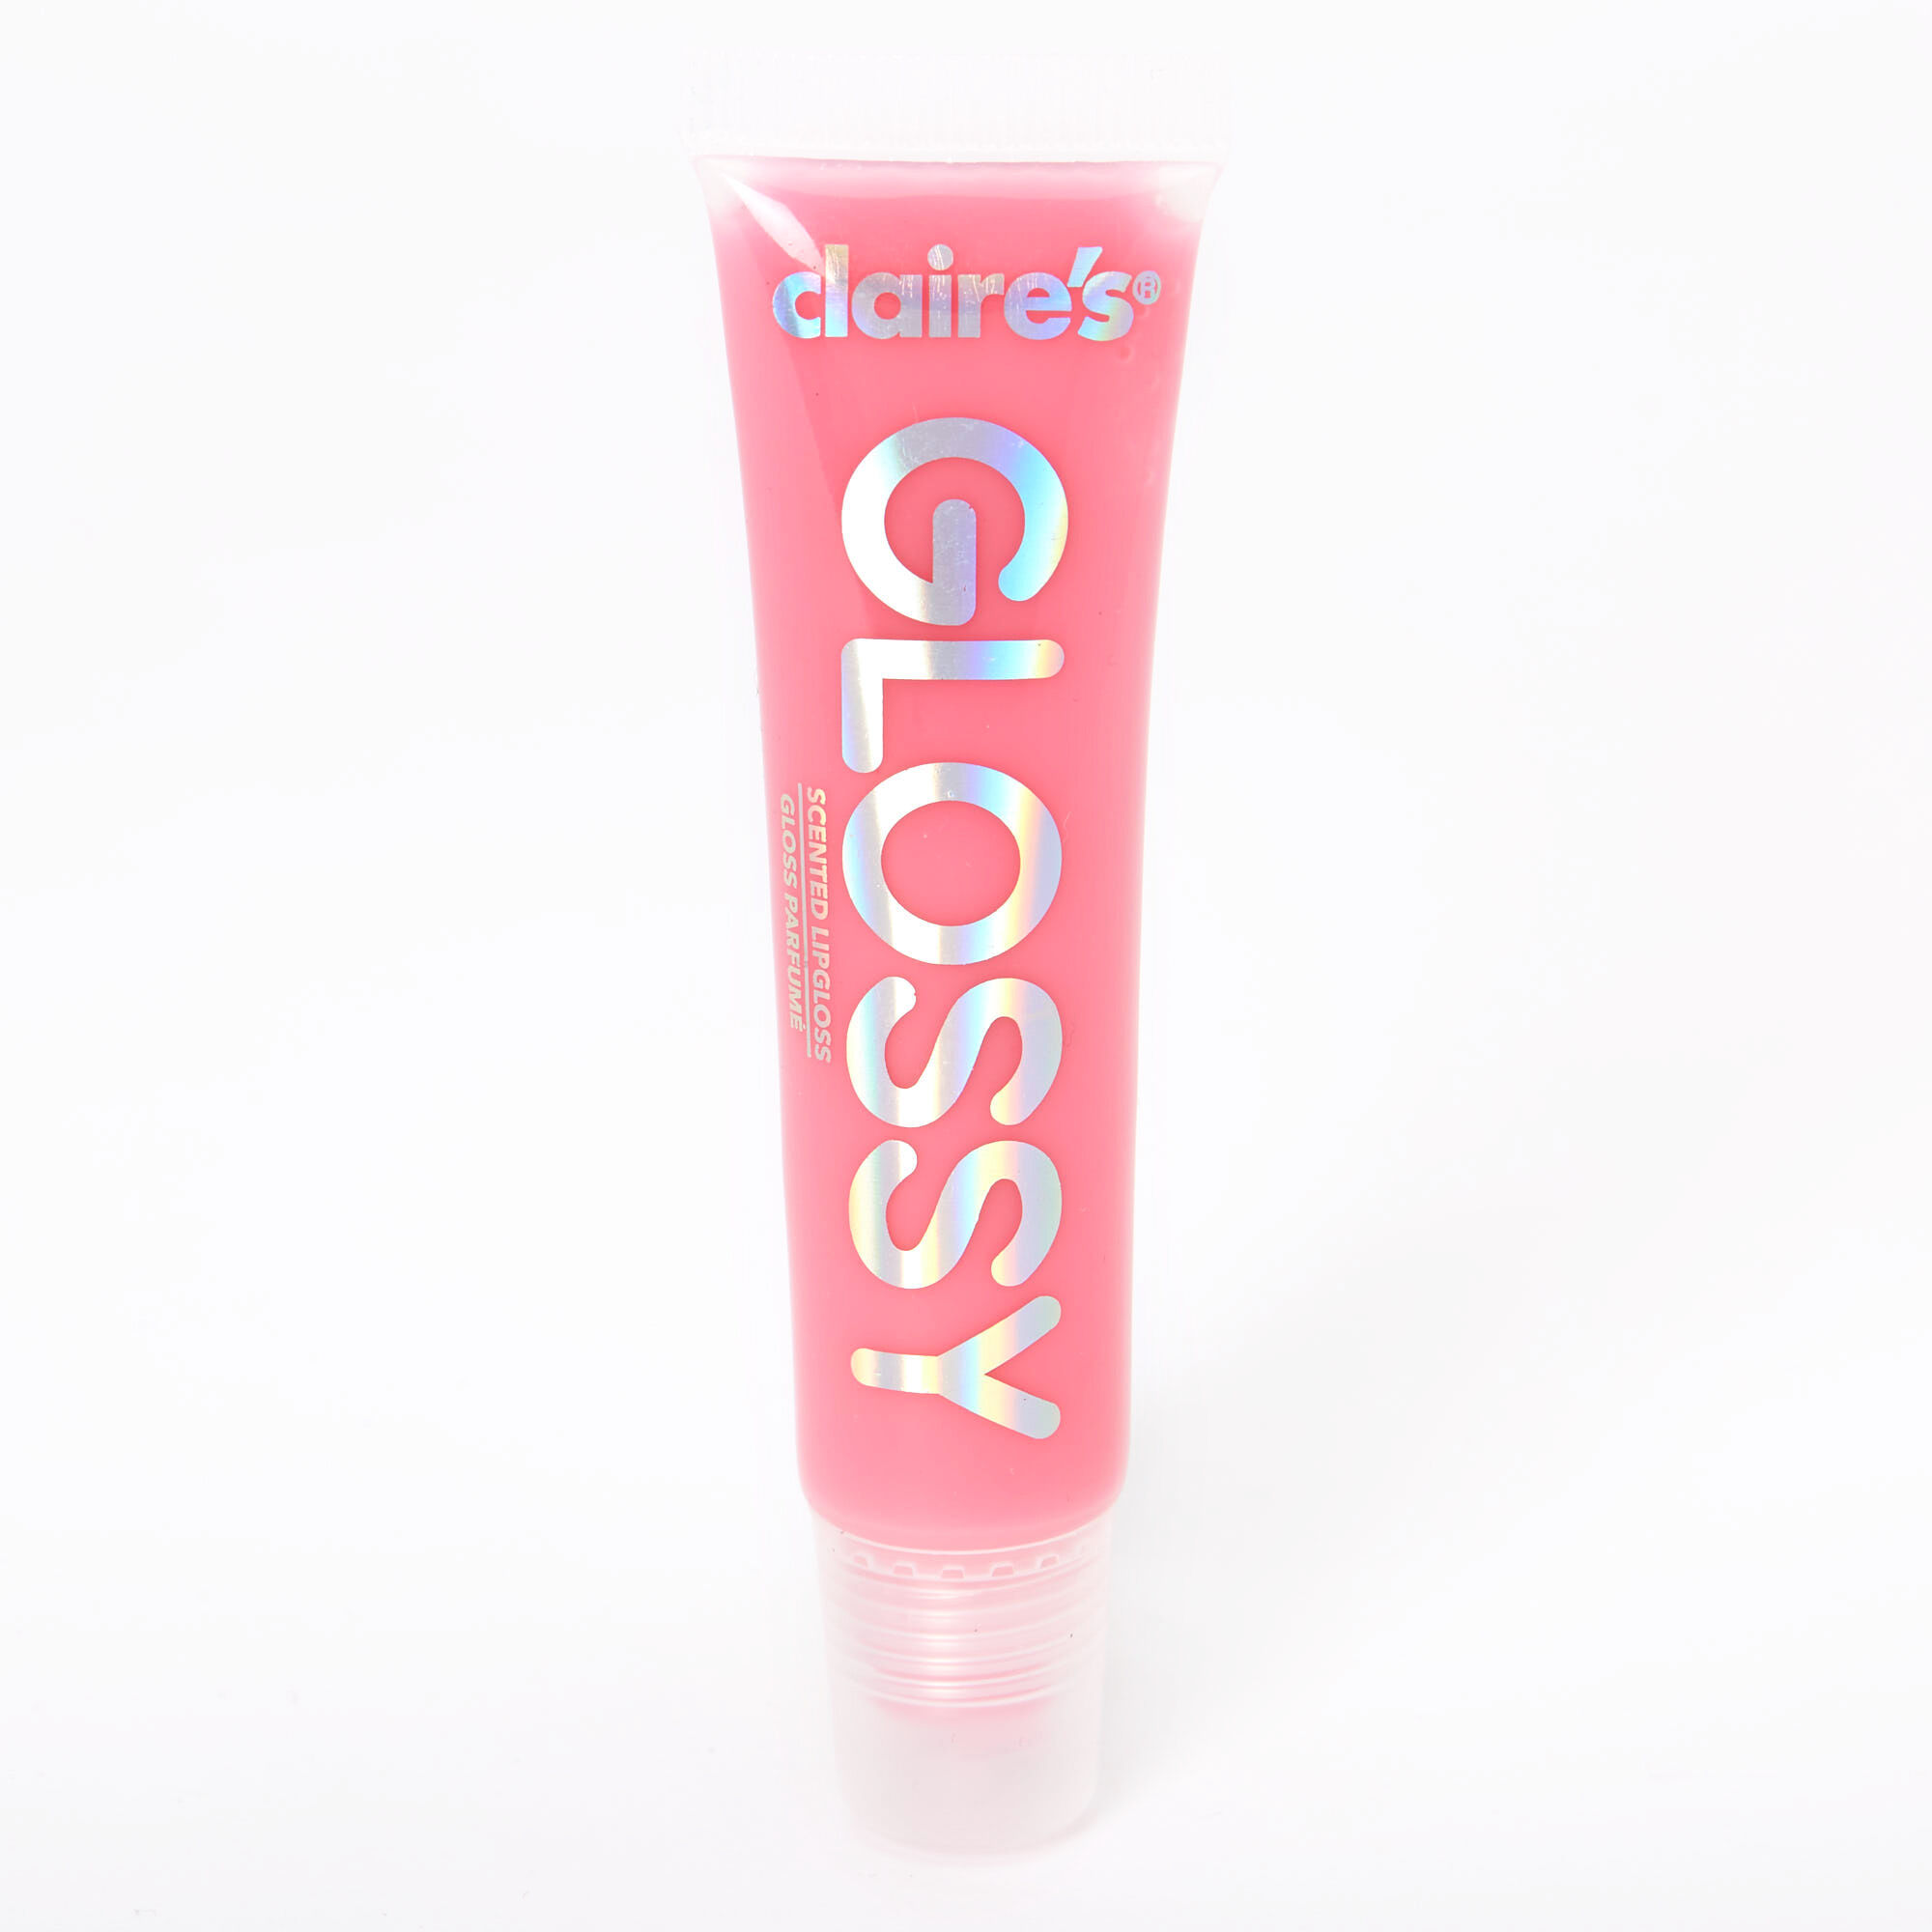 View Claires Glossy Lip Gloss Bubblegum Pink information